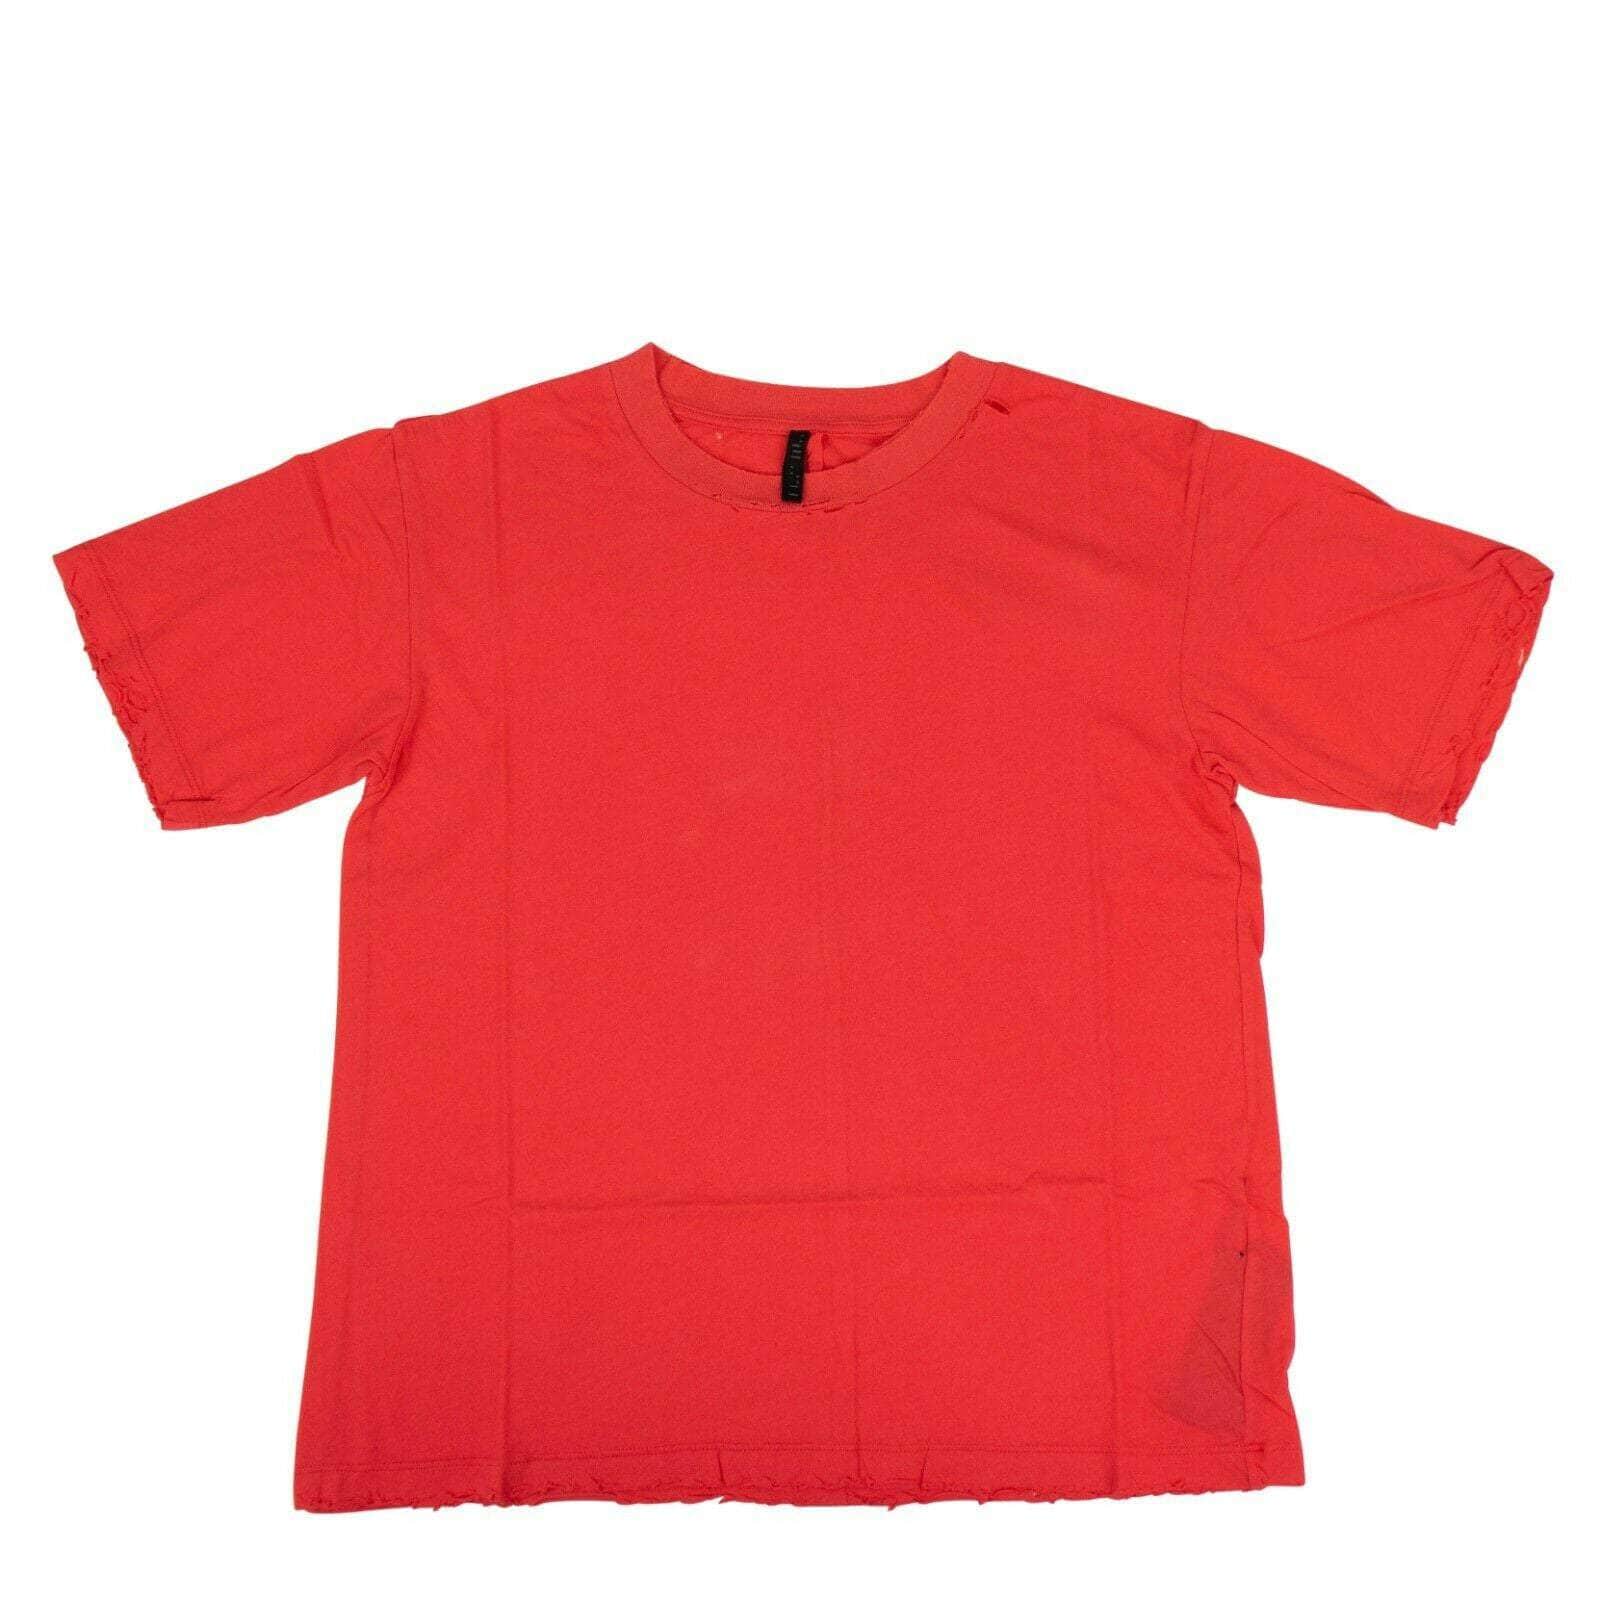 Unravel Project Women's T-Shirts S Cotton Distressed Short Sleeve T-Shirt Top - Red JF6-UN-1045/S JF6-UN-1045/S